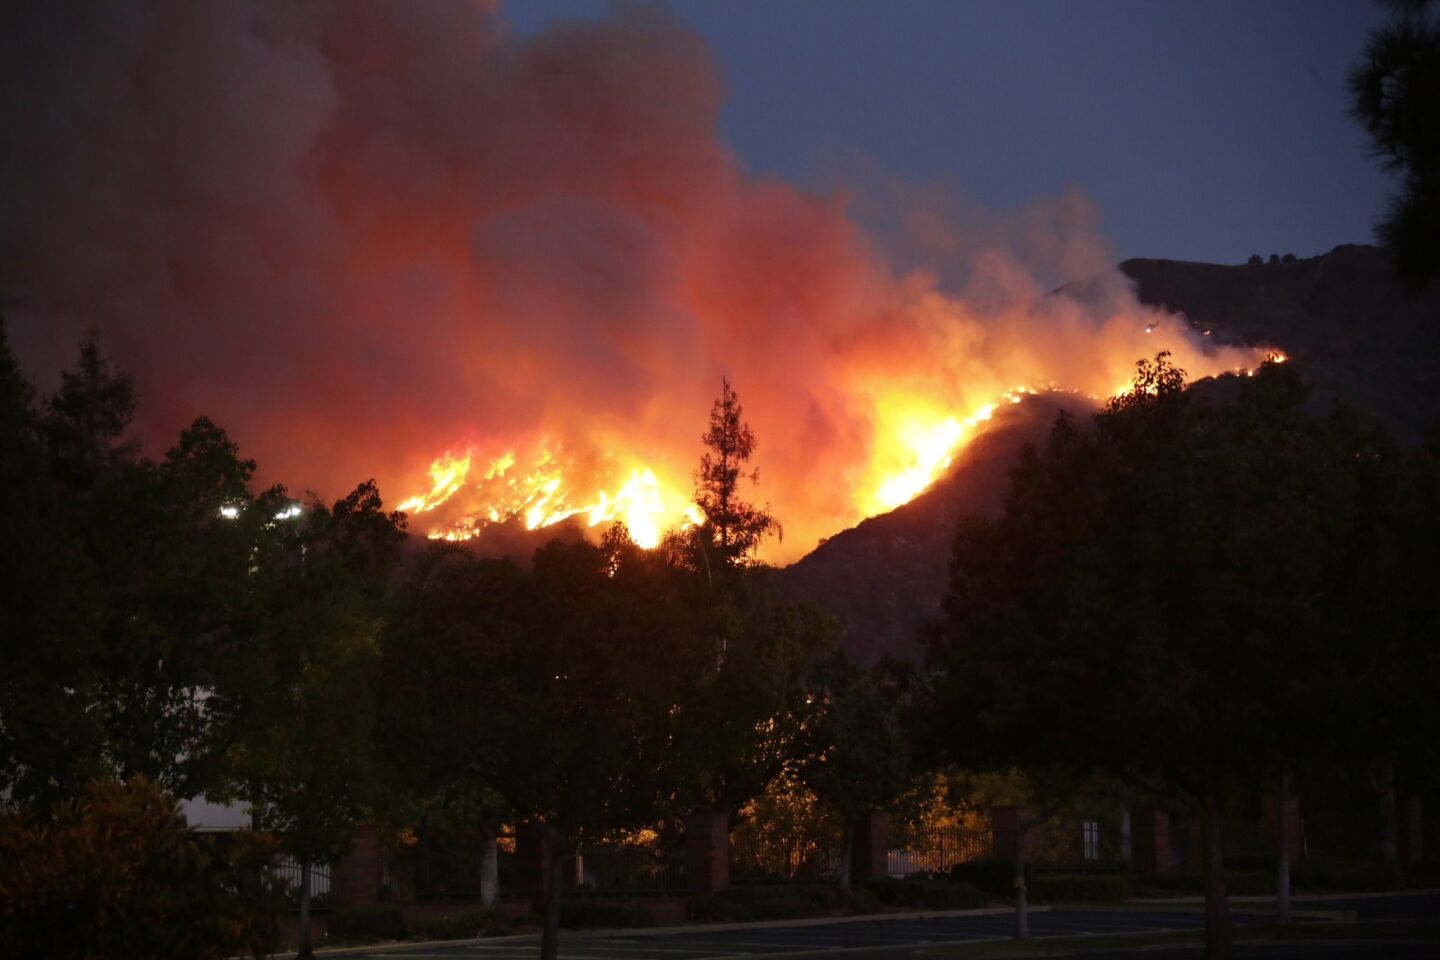 The Colby fire was reported at about 6 a.m. north of Glendora, a foothill community about 30 miles northeast of downtown Los Angeles.